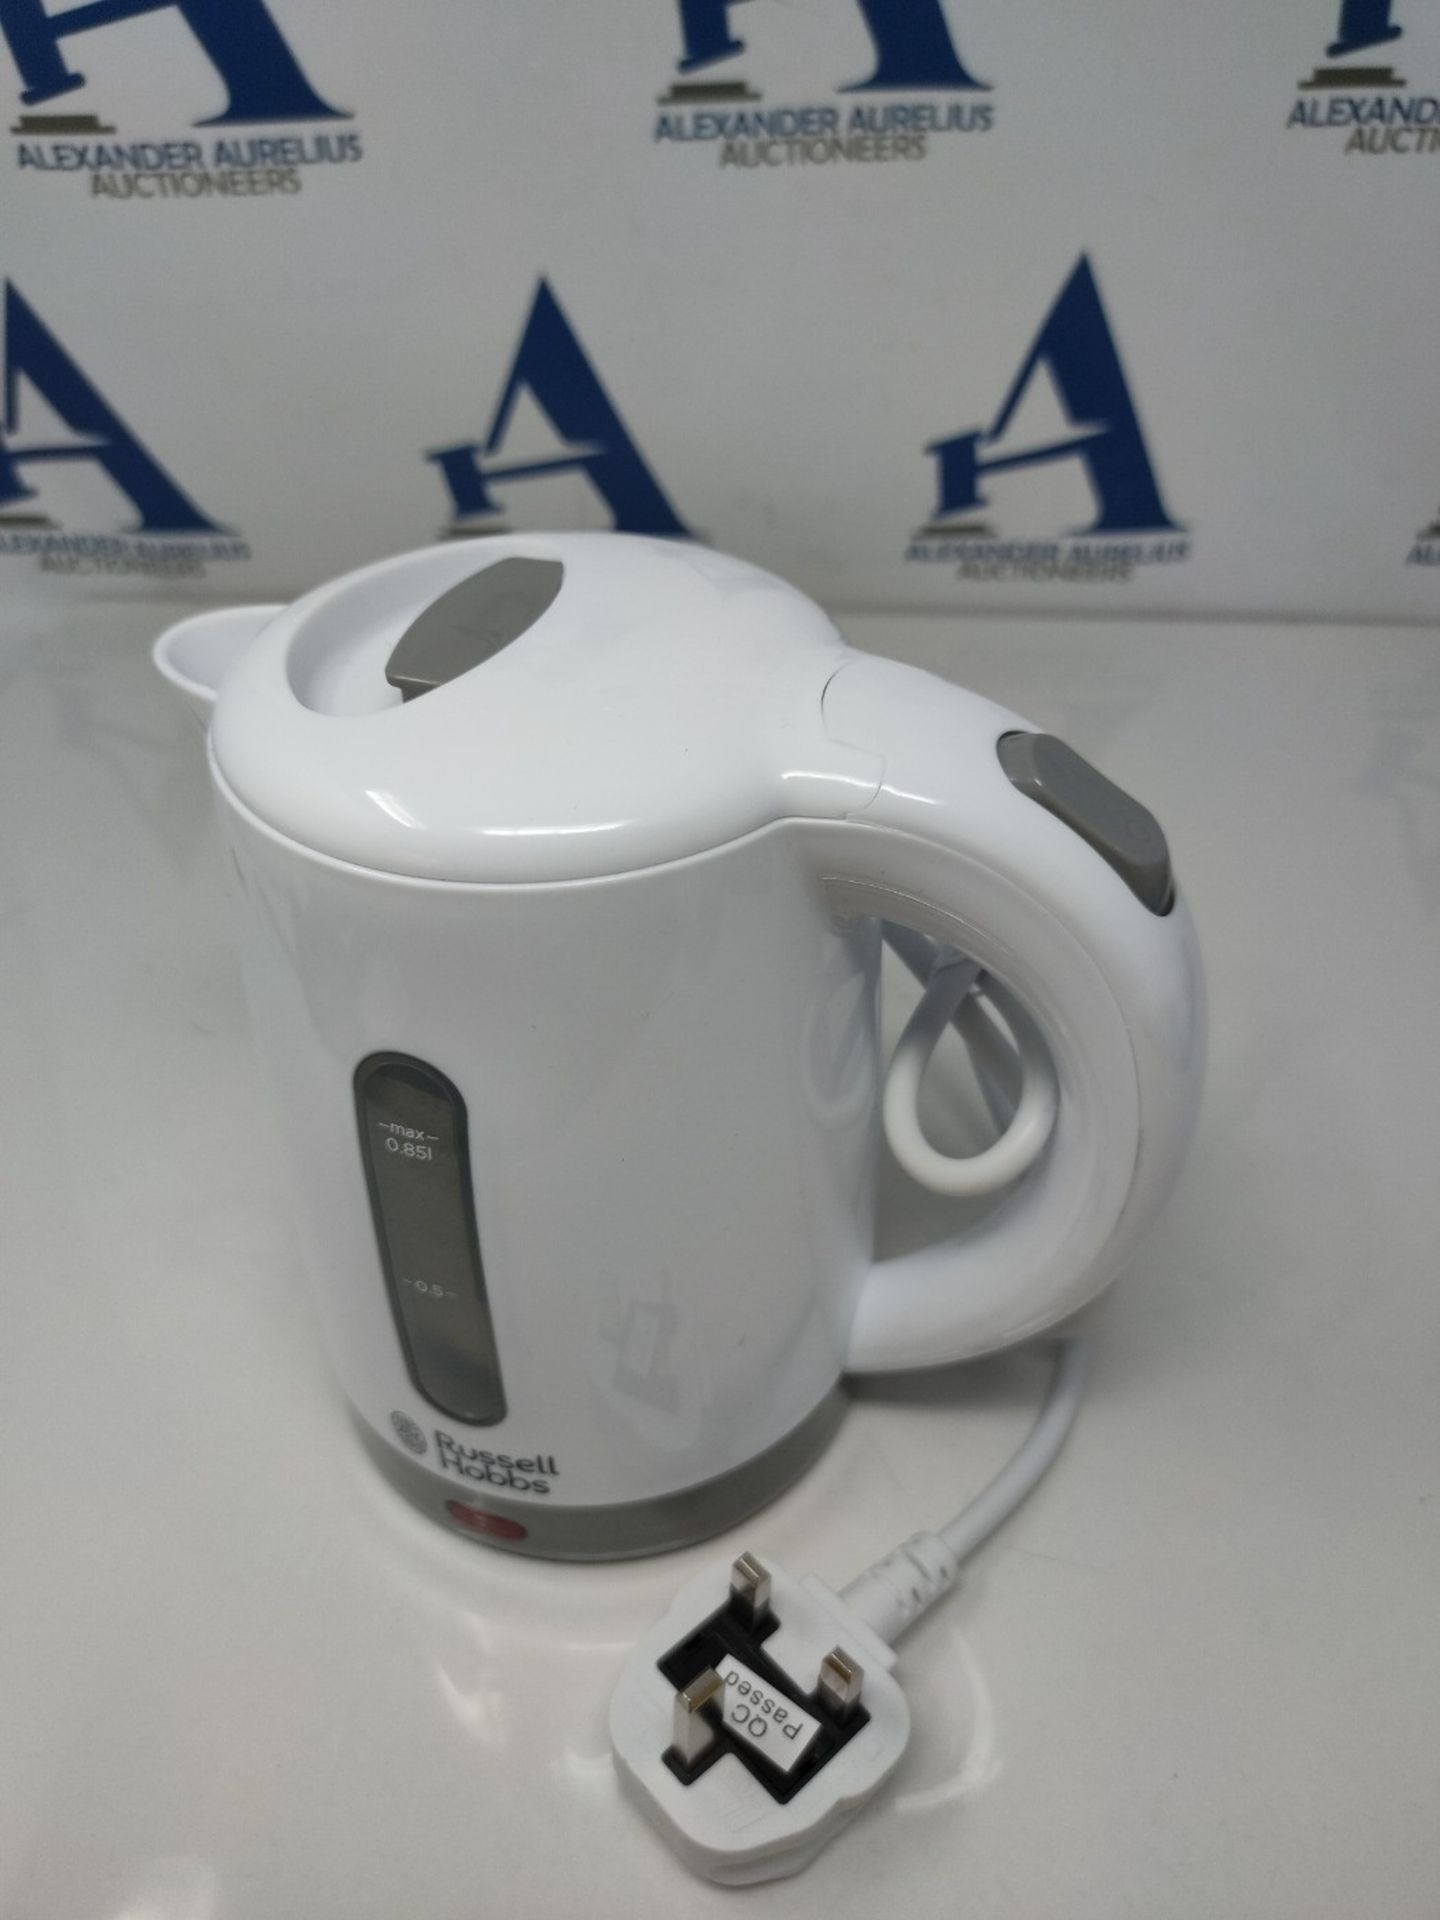 Russell Hobbs 23840 Compact Travel Electric Kettle, Plastic, 1000 W, White - Image 3 of 3